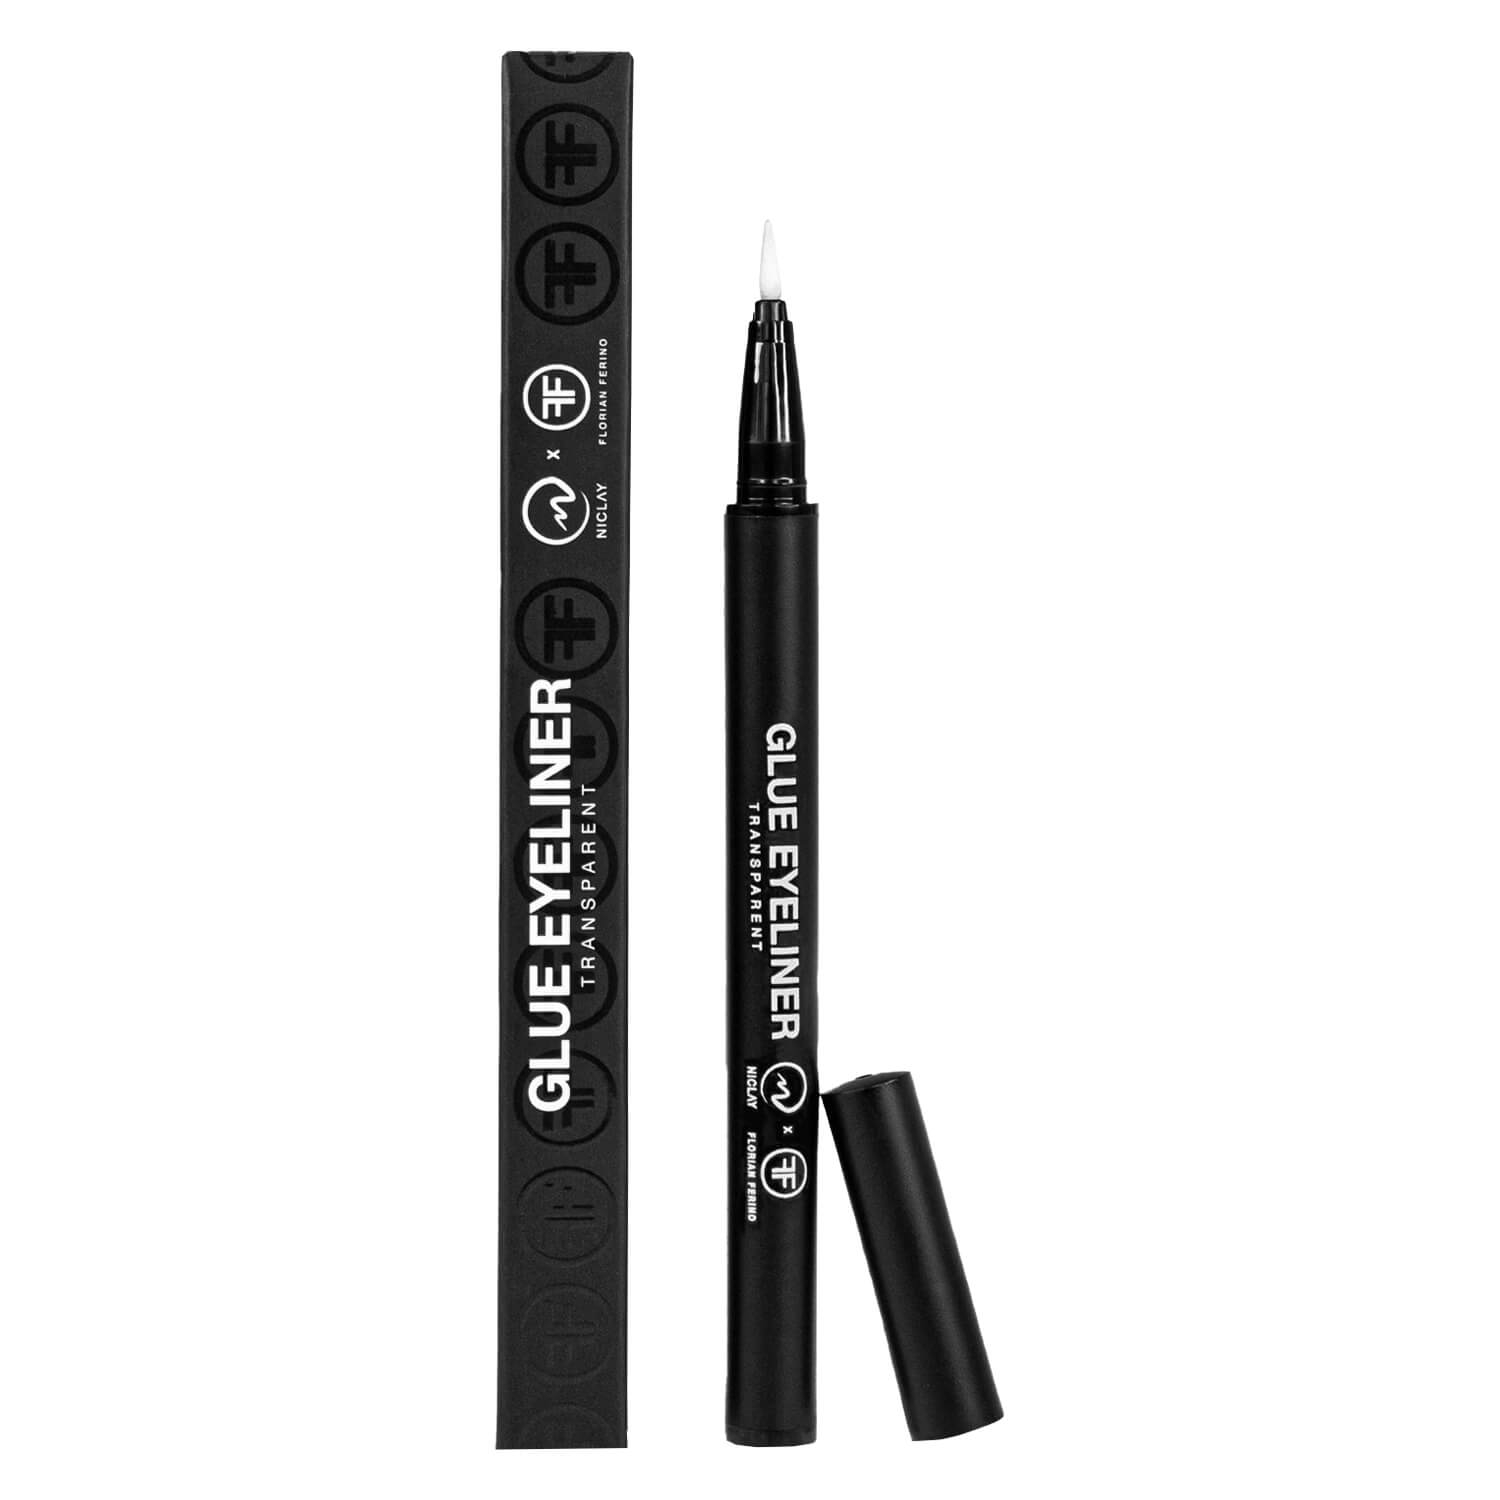 Product image from NICLAY - Florian Ferino Glue Eyeliner Clear